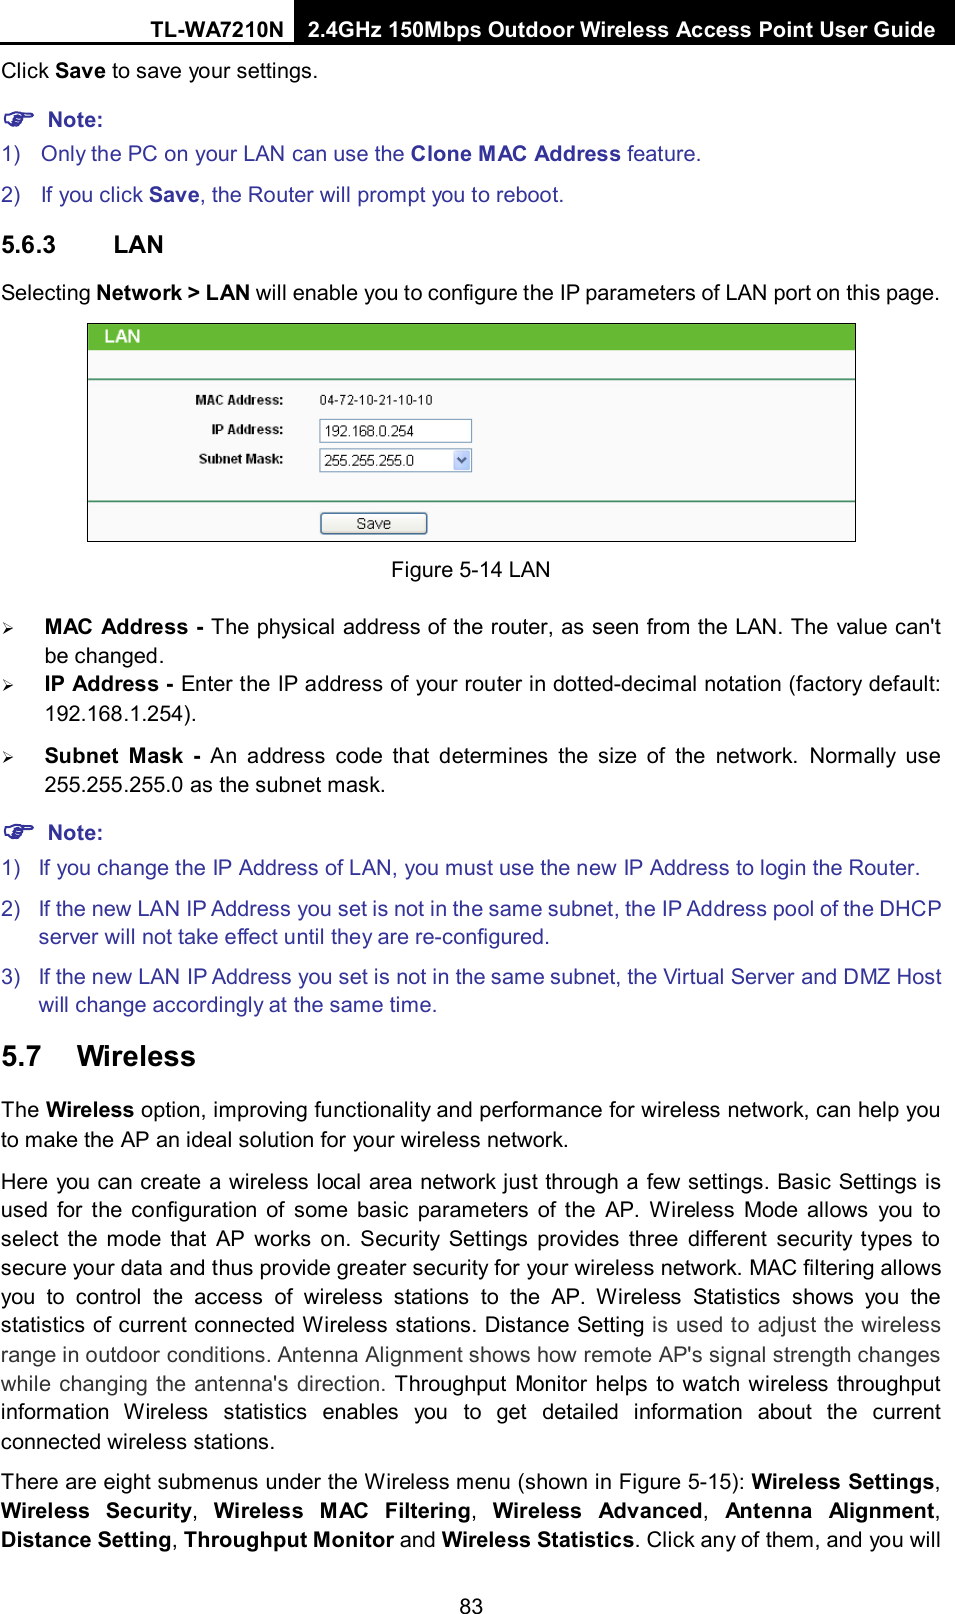 TL-WA7210N 2.4GHz 150Mbps Outdoor Wireless Access Point User Guide  83Click Save to save your settings.  Note: 1) Only the PC on your LAN can use the Clone MAC Address feature. 2) If you click Save, the Router will prompt you to reboot. 5.6.3 LAN Selecting Network &gt; LAN will enable you to configure the IP parameters of LAN port on this page.    Figure 5-14 LAN  MAC Address - The physical address of the router, as seen from the LAN. The value can&apos;t be changed.  IP Address - Enter the IP address of your router in dotted-decimal notation (factory default: 192.168.1.254).  Subnet Mask - An address code that determines the size of the network. Normally use 255.255.255.0 as the subnet mask.  Note: 1) If you change the IP Address of LAN, you must use the new IP Address to login the Router.   2) If the new LAN IP Address you set is not in the same subnet, the IP Address pool of the DHCP server will not take effect until they are re-configured. 3) If the new LAN IP Address you set is not in the same subnet, the Virtual Server and DMZ Host will change accordingly at the same time. 5.7 Wireless The Wireless option, improving functionality and performance for wireless network, can help you to make the AP an ideal solution for your wireless network.   Here you can create a wireless local area network just through a few settings. Basic Settings is used for  the configuration of some basic parameters of the AP.  Wireless Mode allows you to select the mode that AP works on. Security Settings provides three different security types to secure your data and thus provide greater security for your wireless network. MAC filtering allows you to control the access of wireless stations to the AP. Wireless Statistics shows you the statistics of current connected Wireless stations. Distance Setting is used to adjust the wireless range in outdoor conditions. Antenna Alignment shows how remote AP&apos;s signal strength changes while changing the antenna&apos;s direction. Throughput Monitor helps to watch wireless throughput information Wireless statistics enables you to get detailed information about the current connected wireless stations. There are eight submenus under the Wireless menu (shown in Figure 5-15): Wireless Settings, Wireless  Security, Wireless  MAC Filtering, Wireless Advanced,  Antenna Alignment, Distance Setting, Throughput Monitor and Wireless Statistics. Click any of them, and you will 